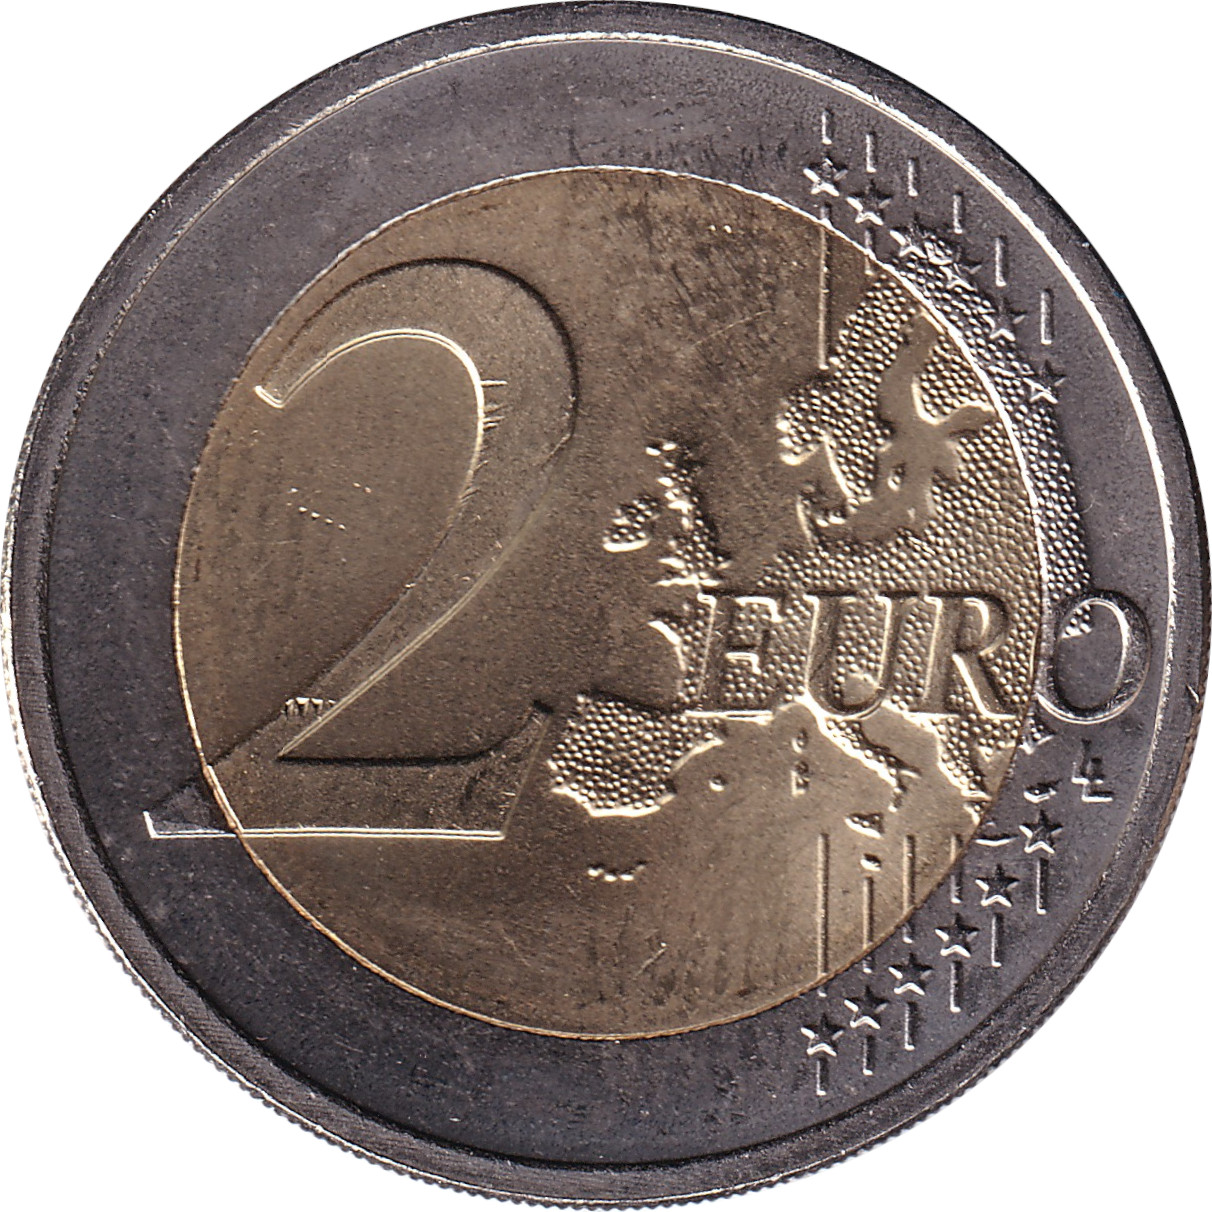 2 euro - Volontaires - 50 years